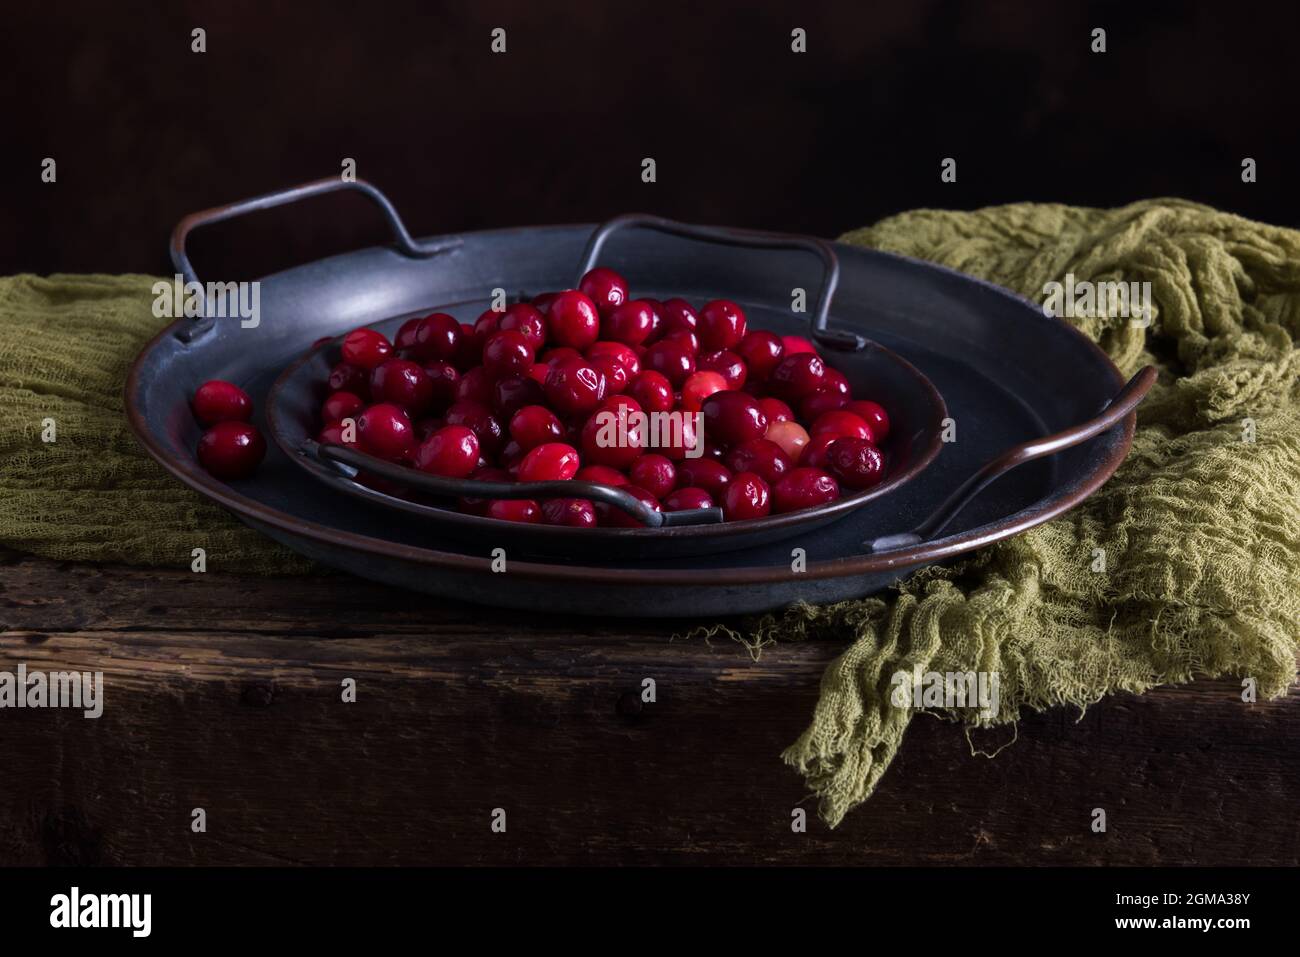 Still life with 2 rustic plates filled with fresh cranberries on an antique wooden table Stock Photo